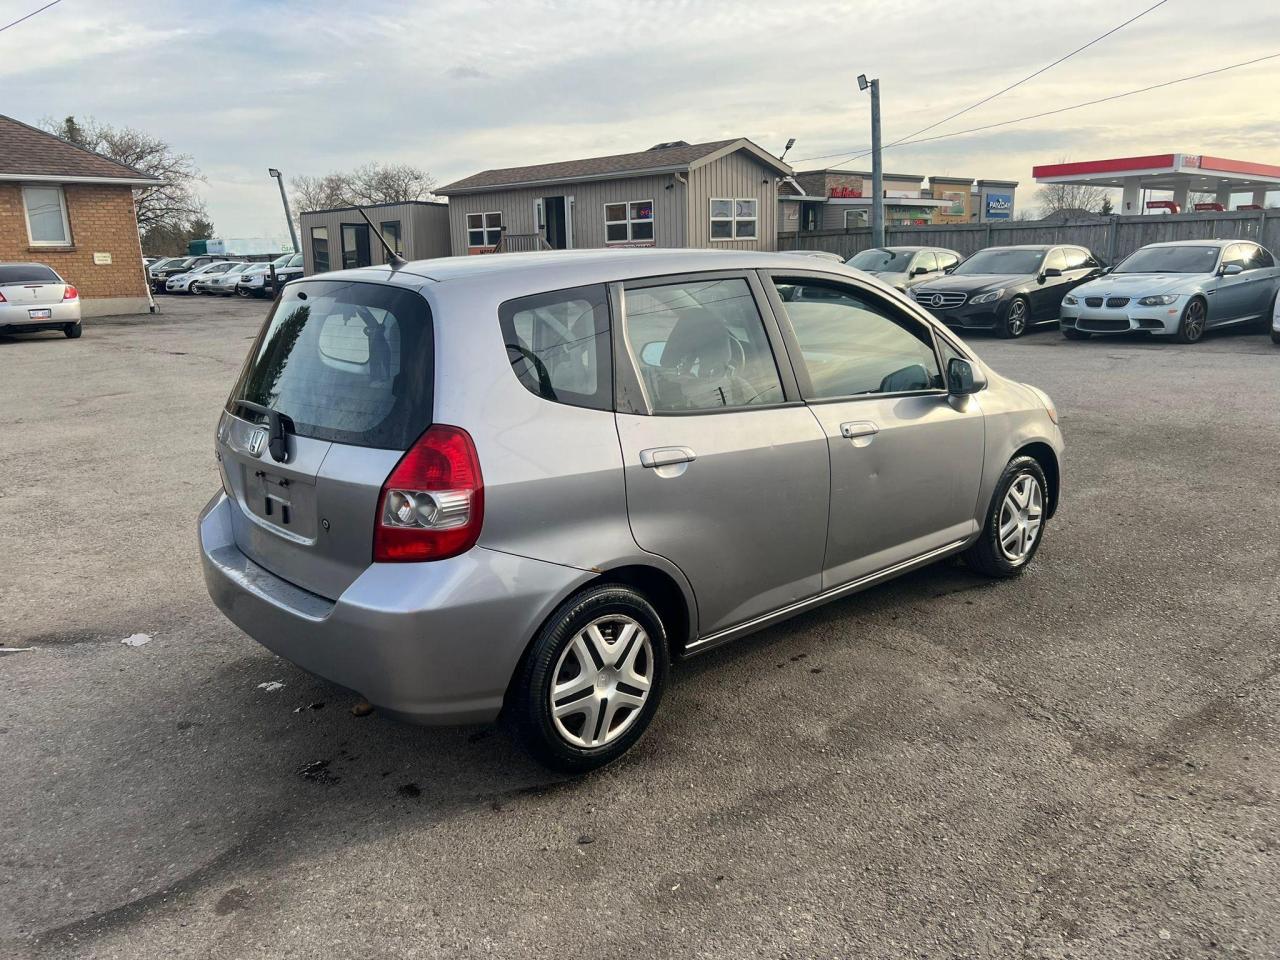 2008 Honda Fit LX*4 DOOR*HATCH*4 CYL*GREAT ON FUEL*ONLY 163KMS* - Photo #5